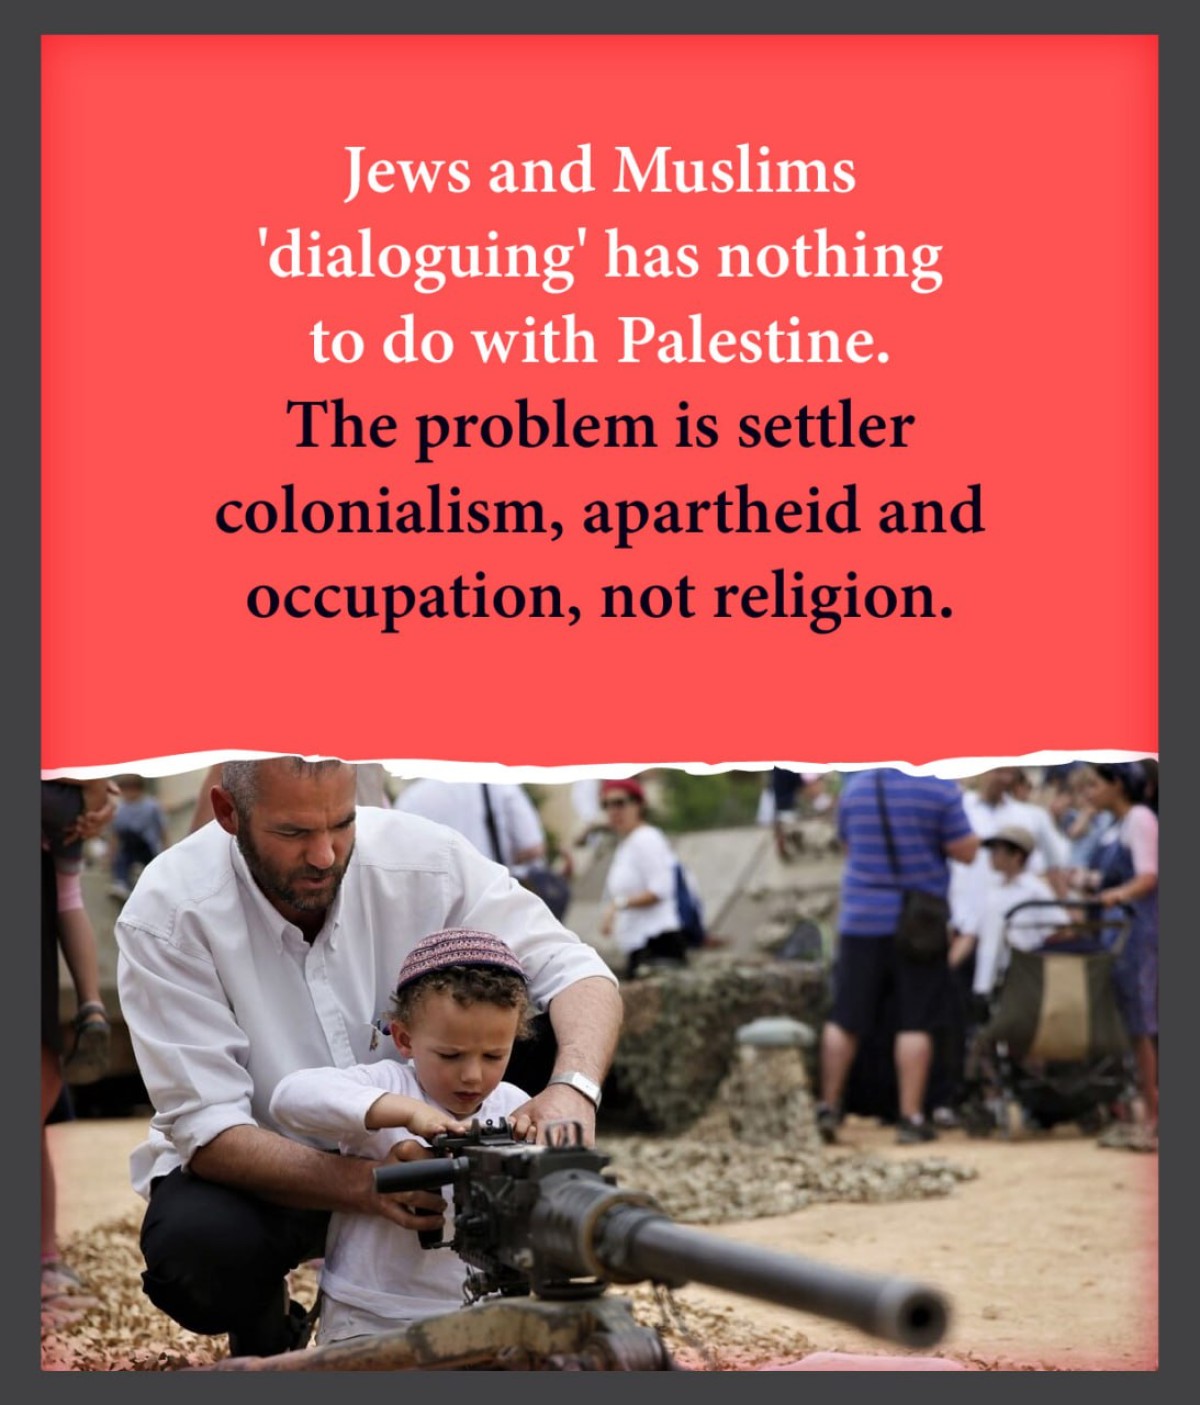 Jews and Muslims 'dialoguing' has nothing to do with Palestine